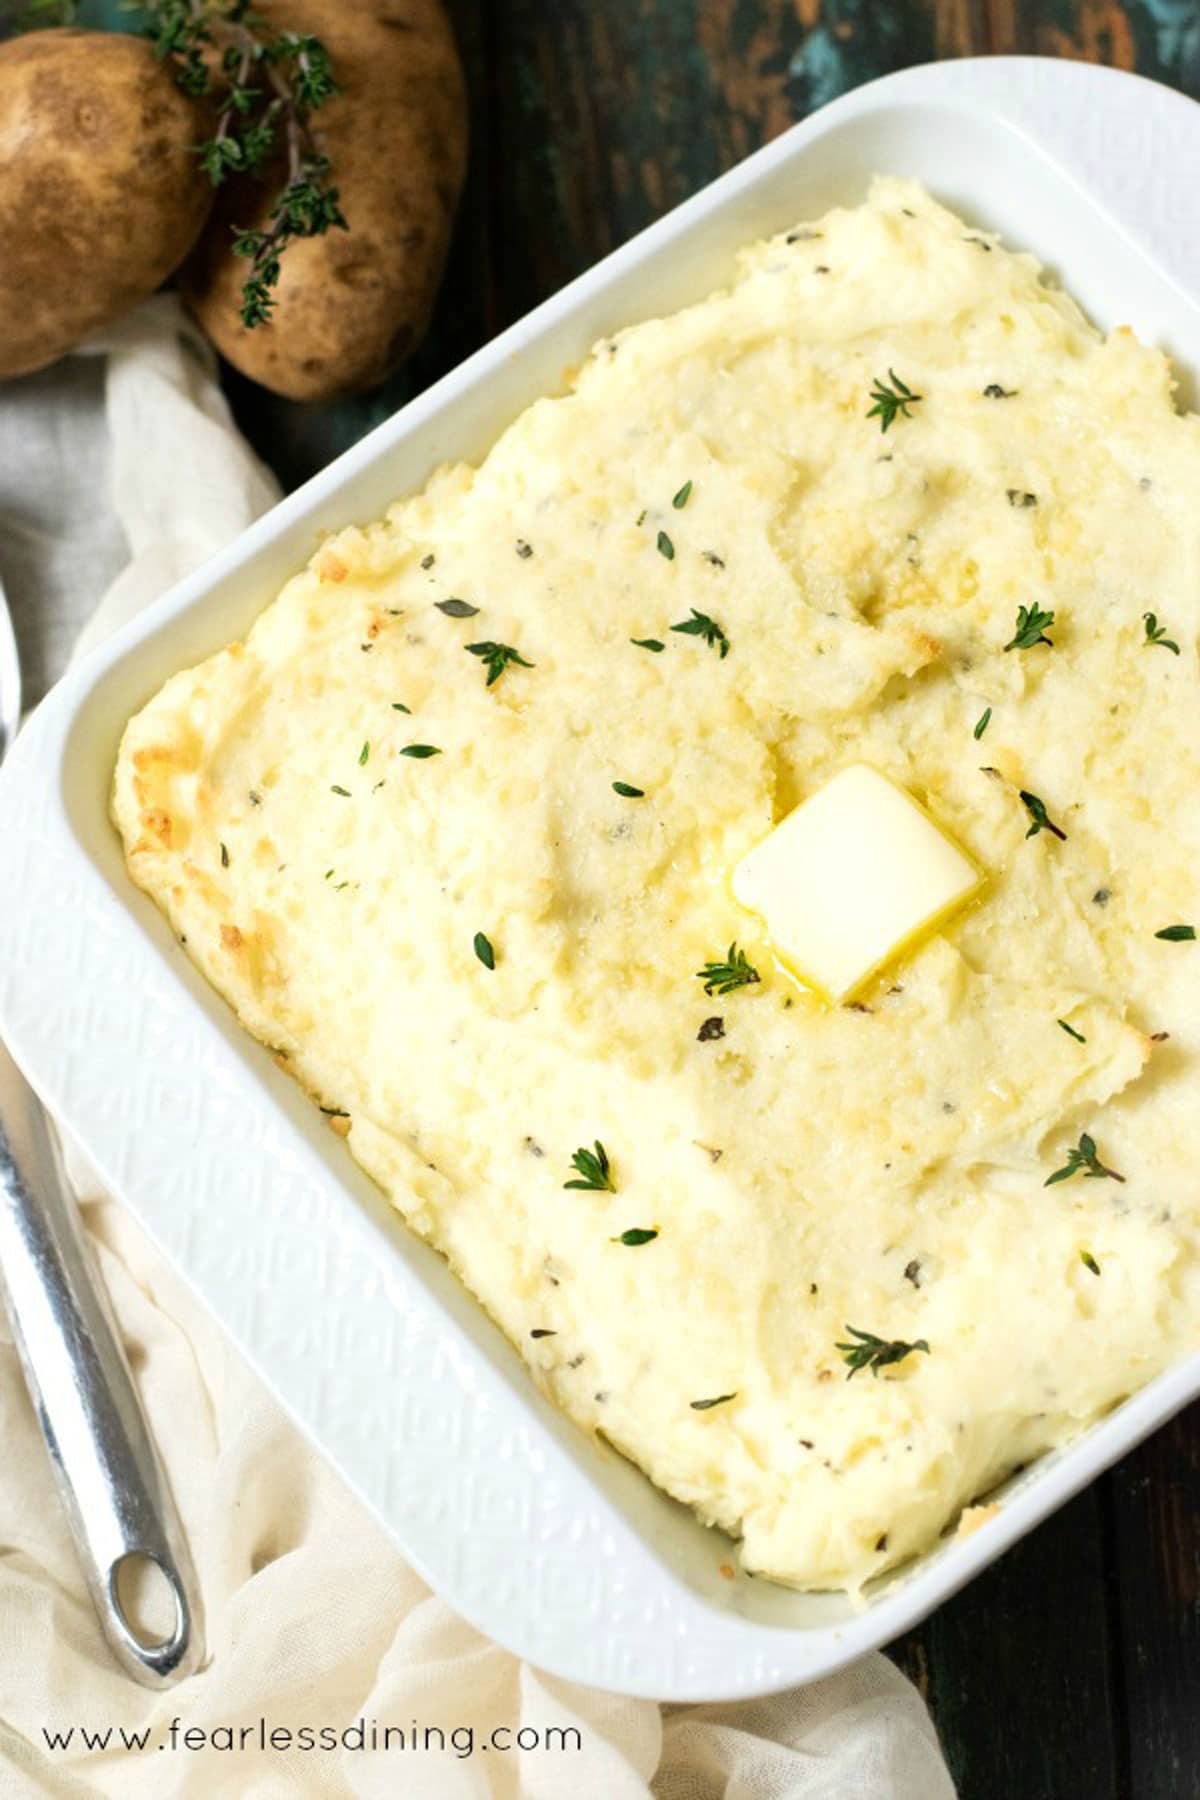 A casserole dish filled with cream cheese mashed potatoes. It has a butter patty melting on top.